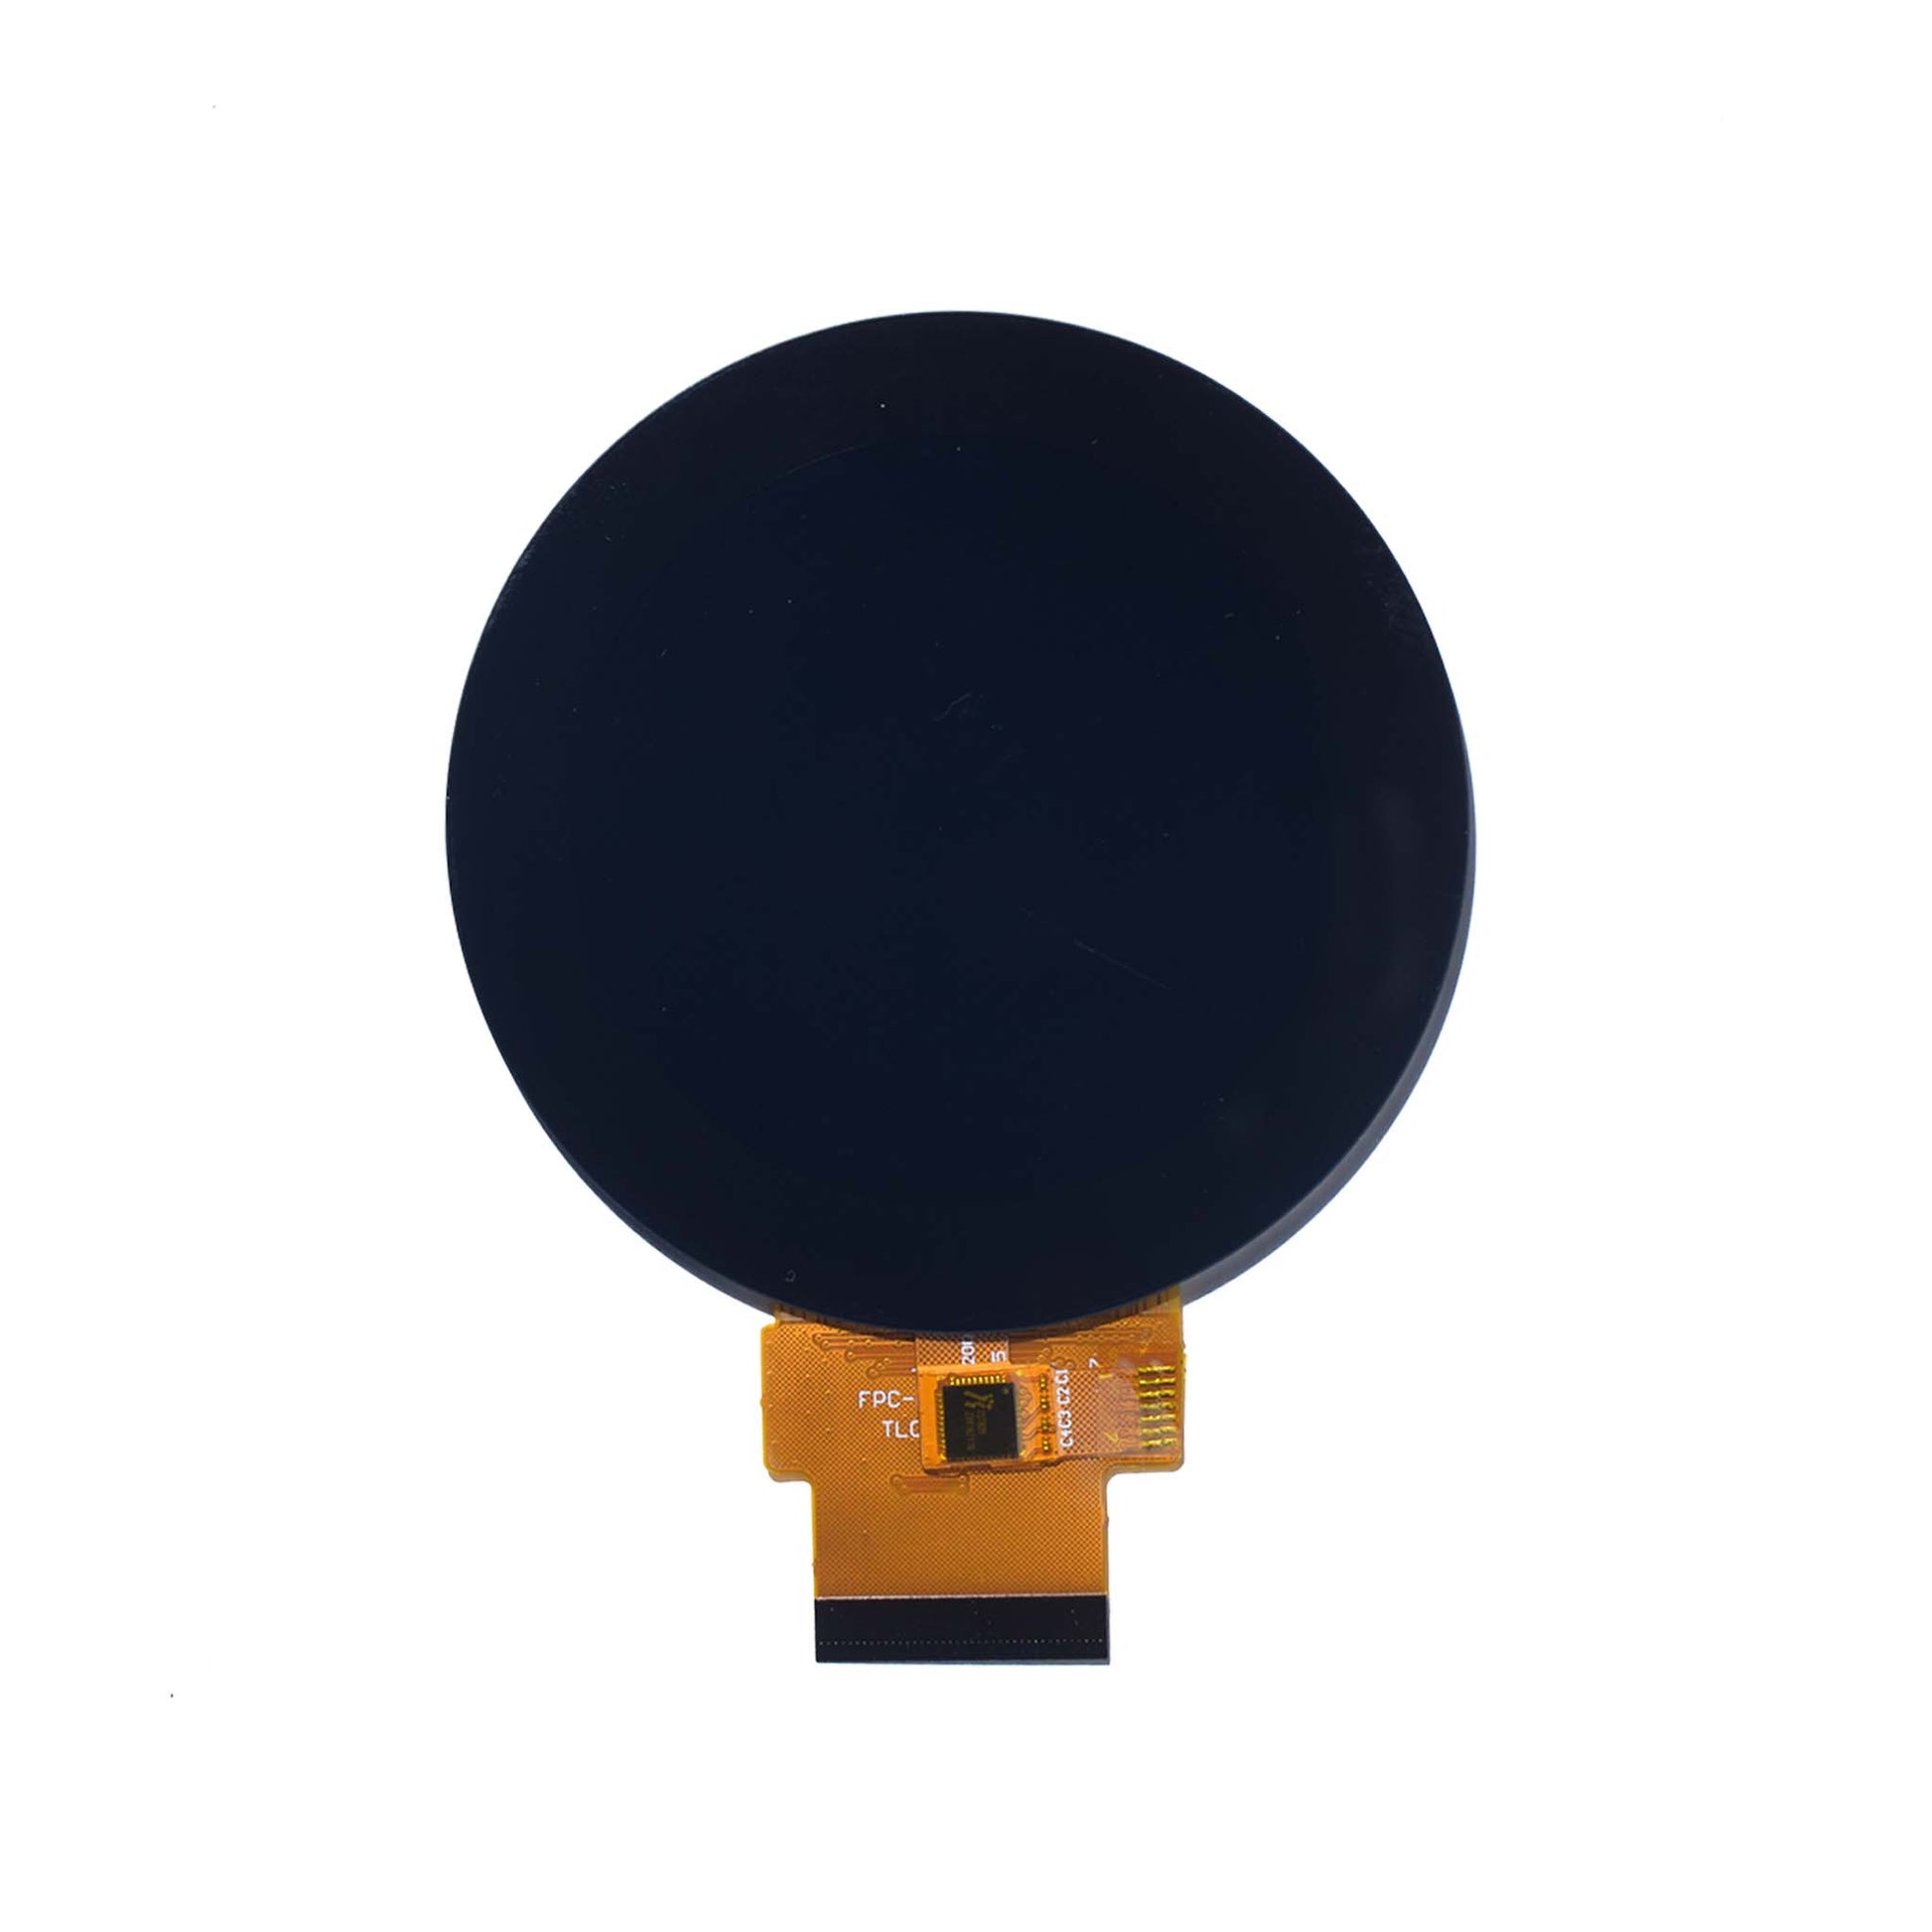 2.1 inch Round TFT Display screen